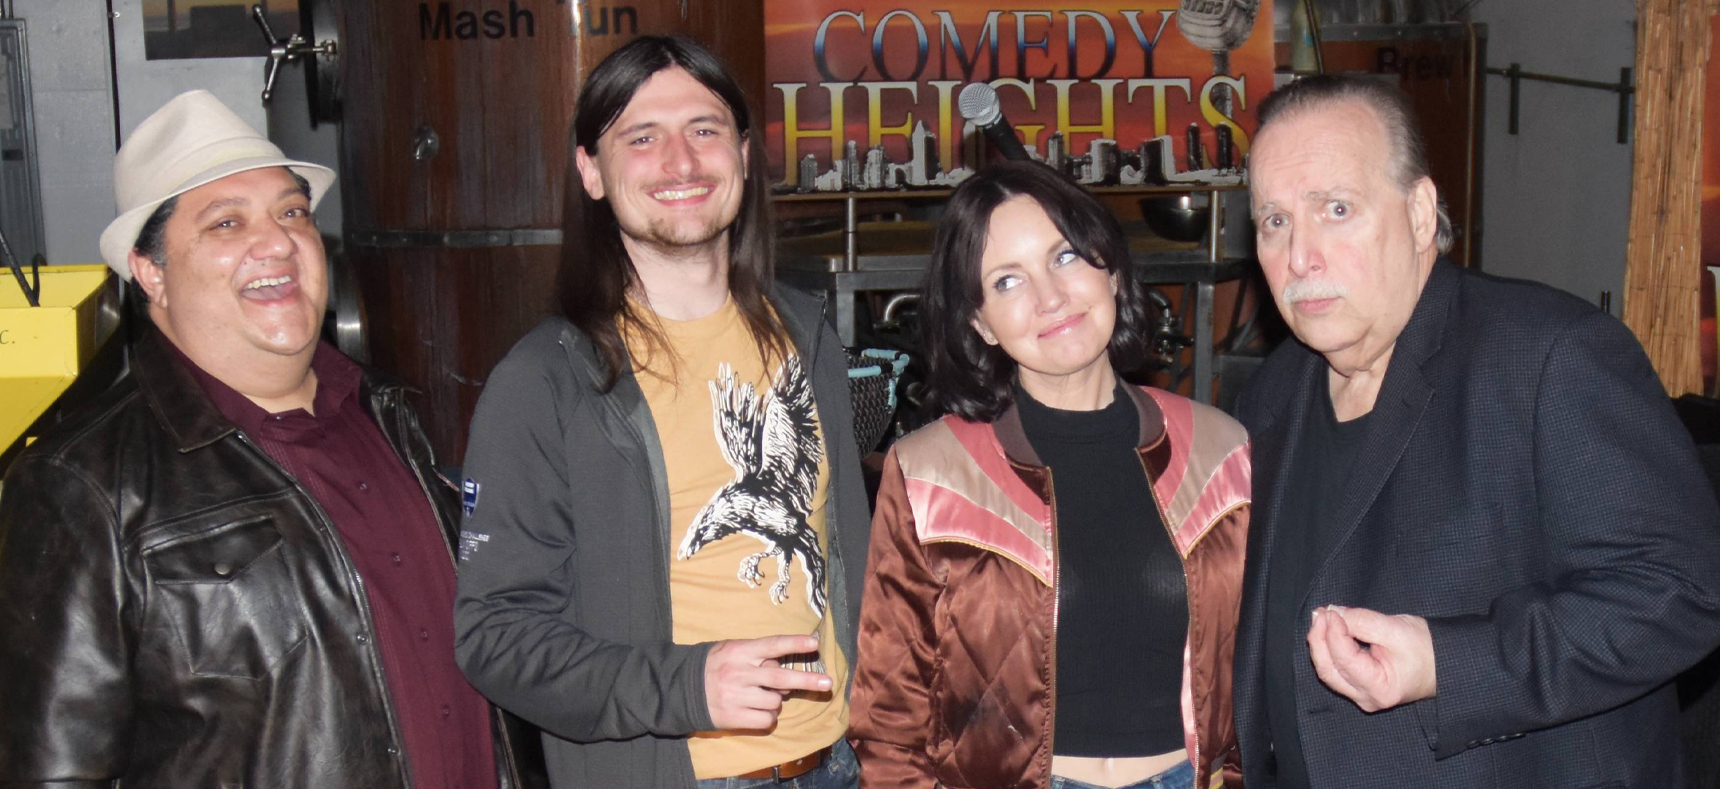 Comedy Heights at Bay Bridge Brewing was buzzing Friday night.